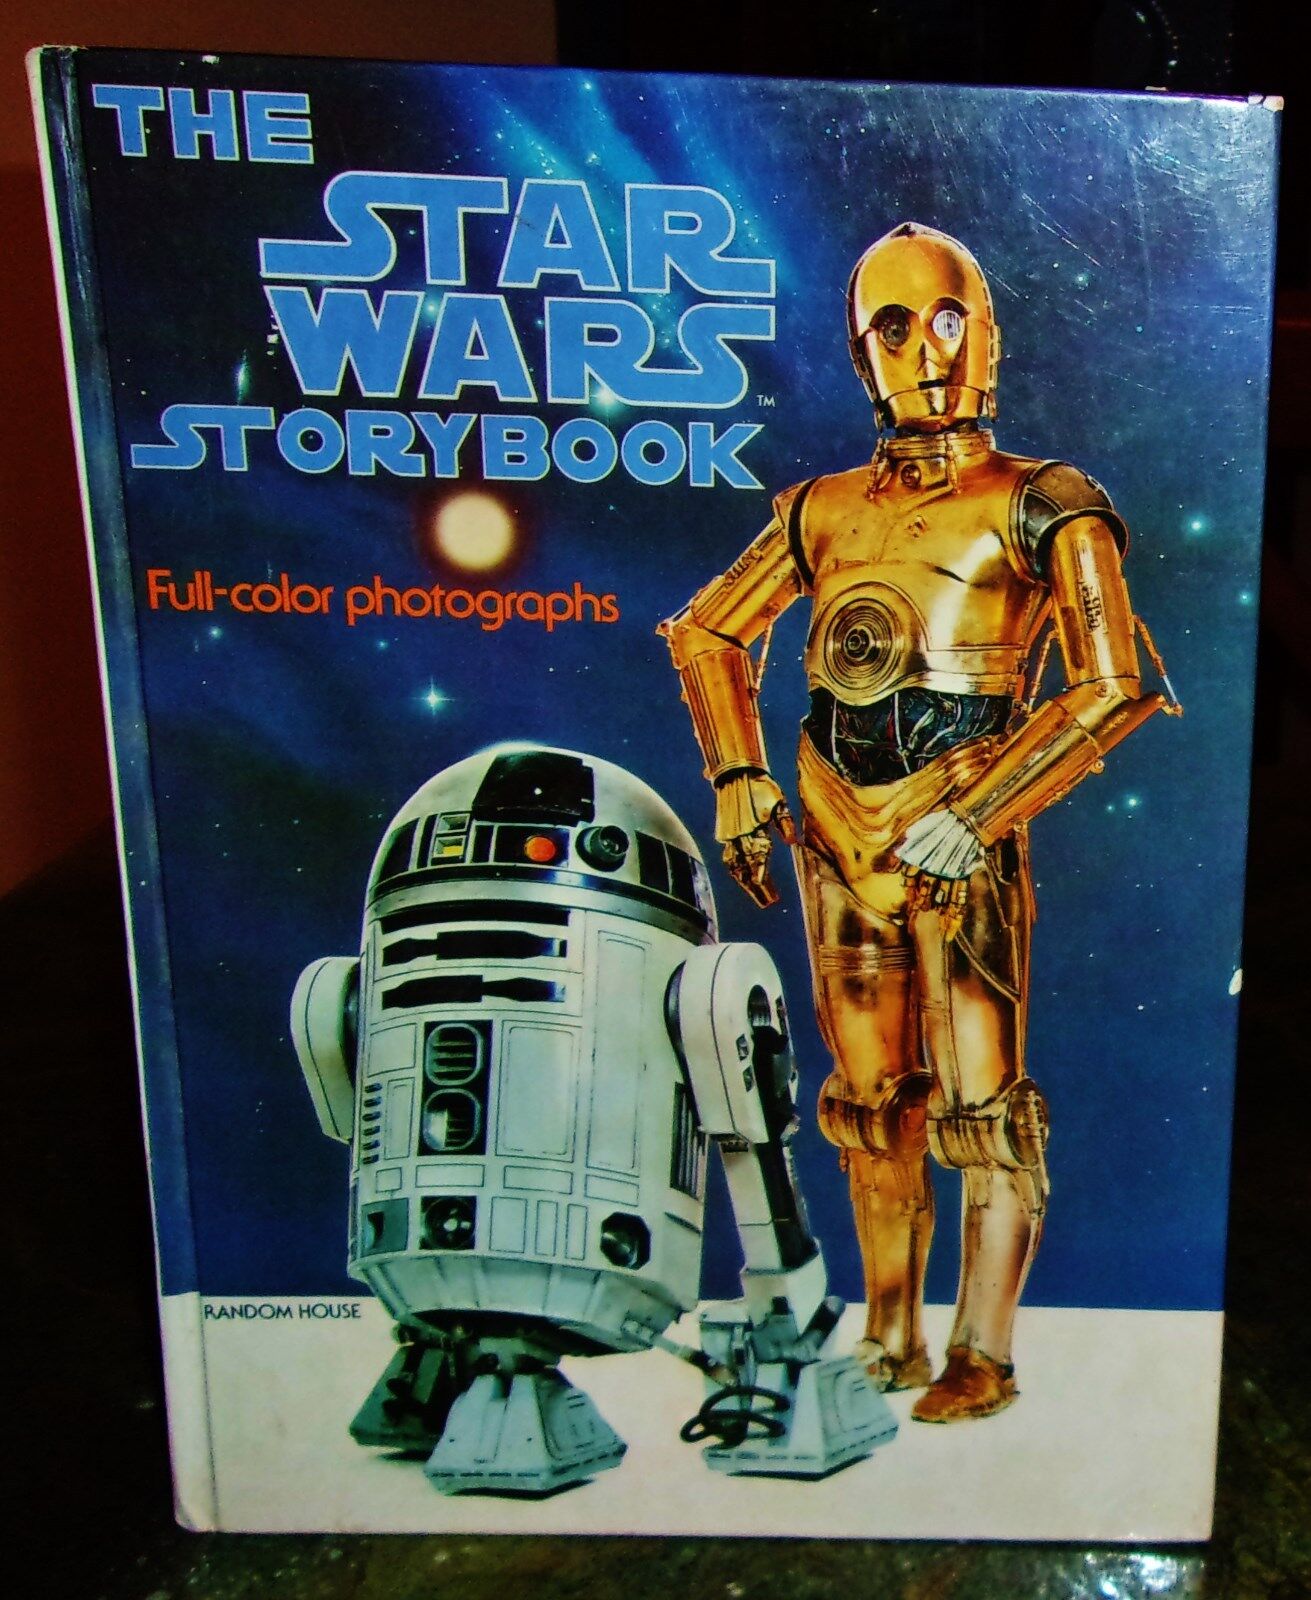 STAR WARS STORYBOOK 1978 ANTIQUE HC MOVIE TIE IN FULL COLOR PHOTO BOOK RARE